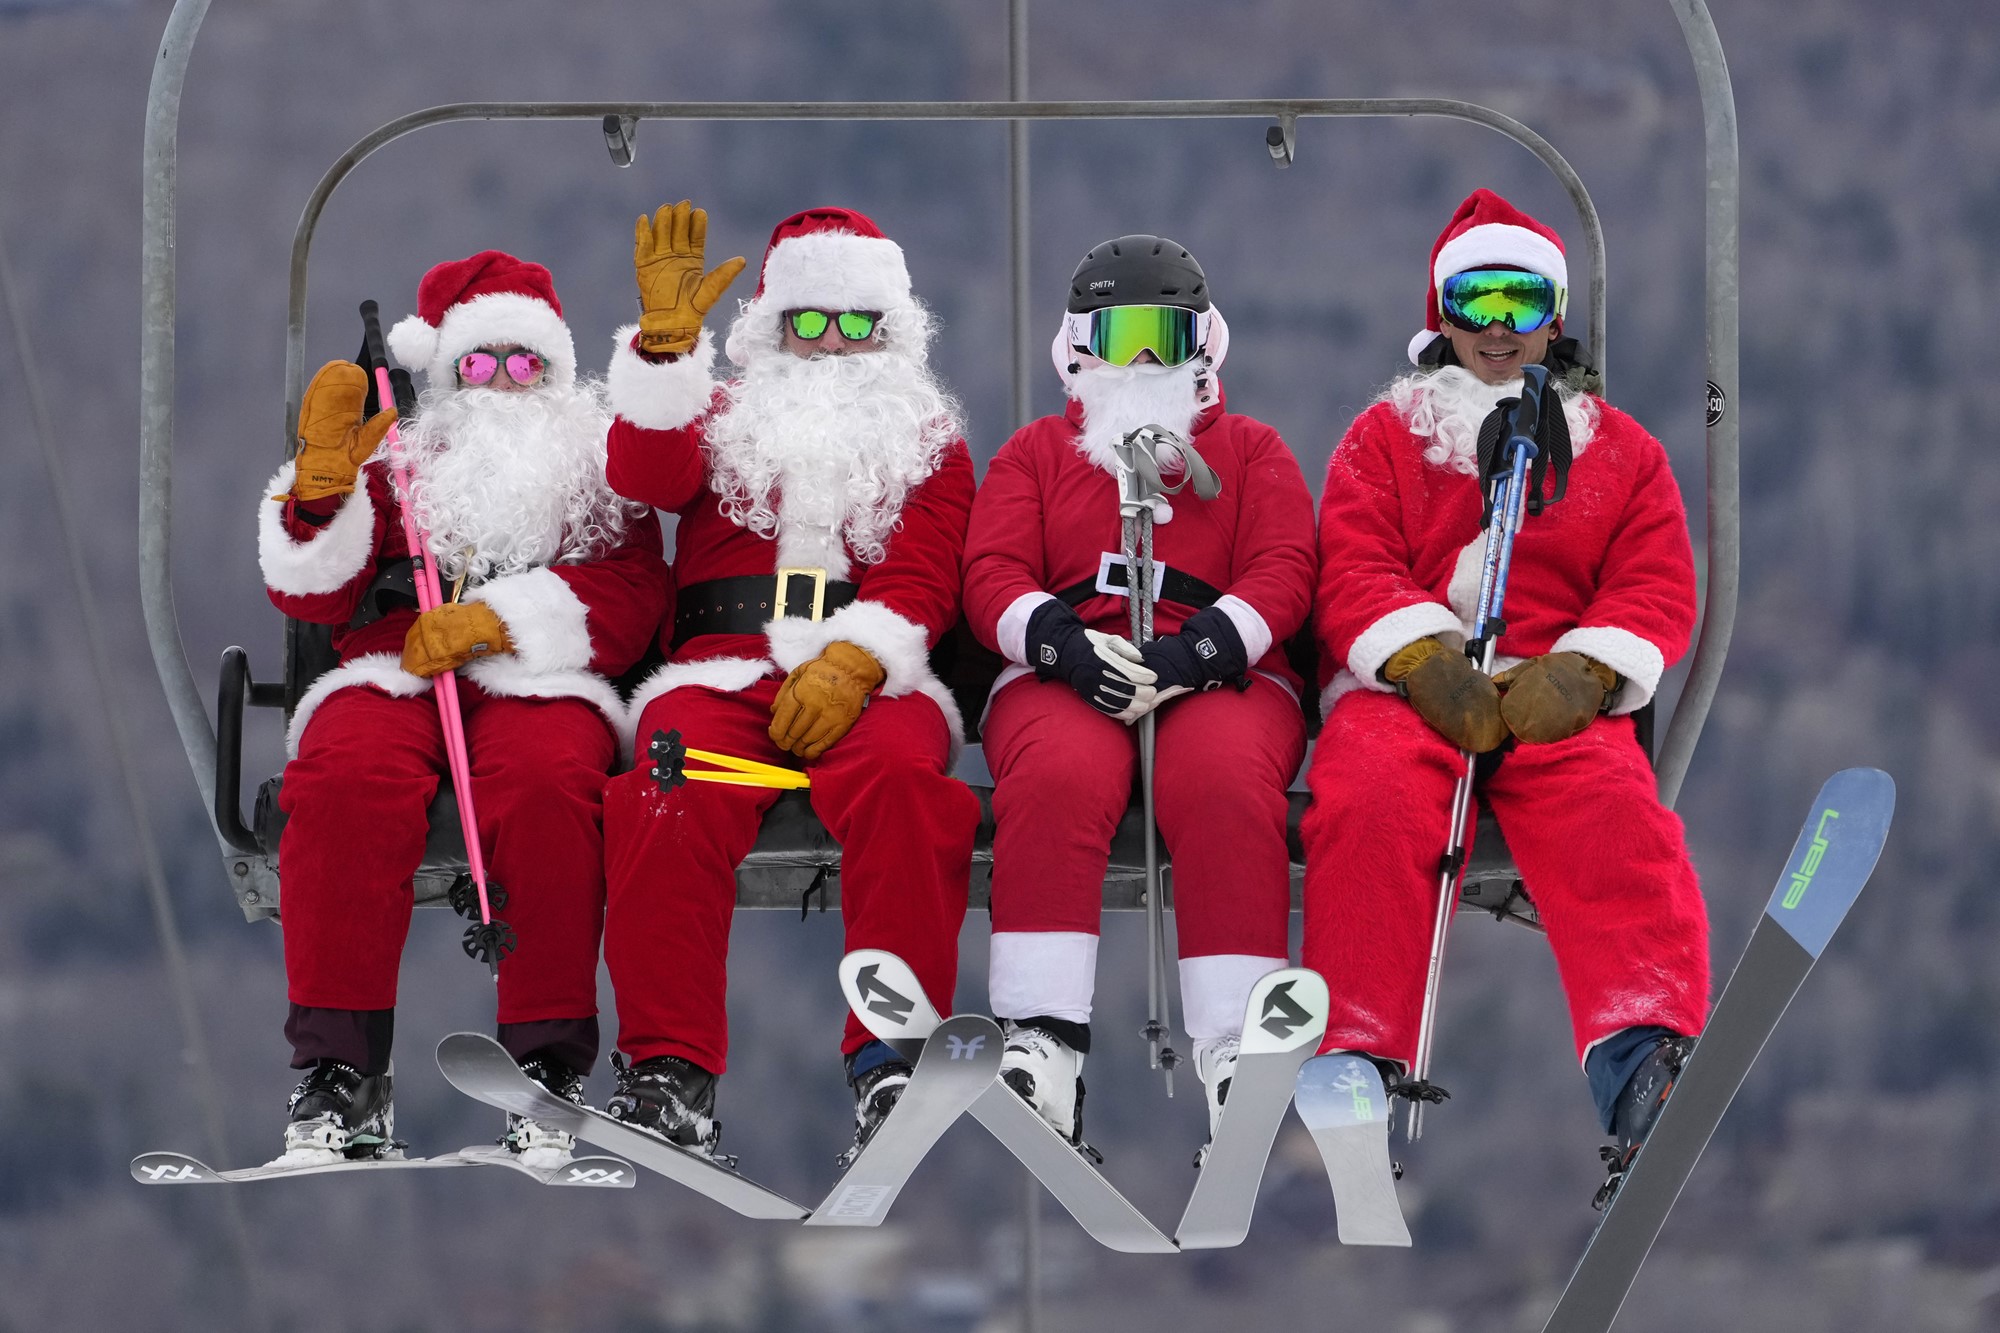 Four people in ski gear and santa costumes sit on a ski lift. 